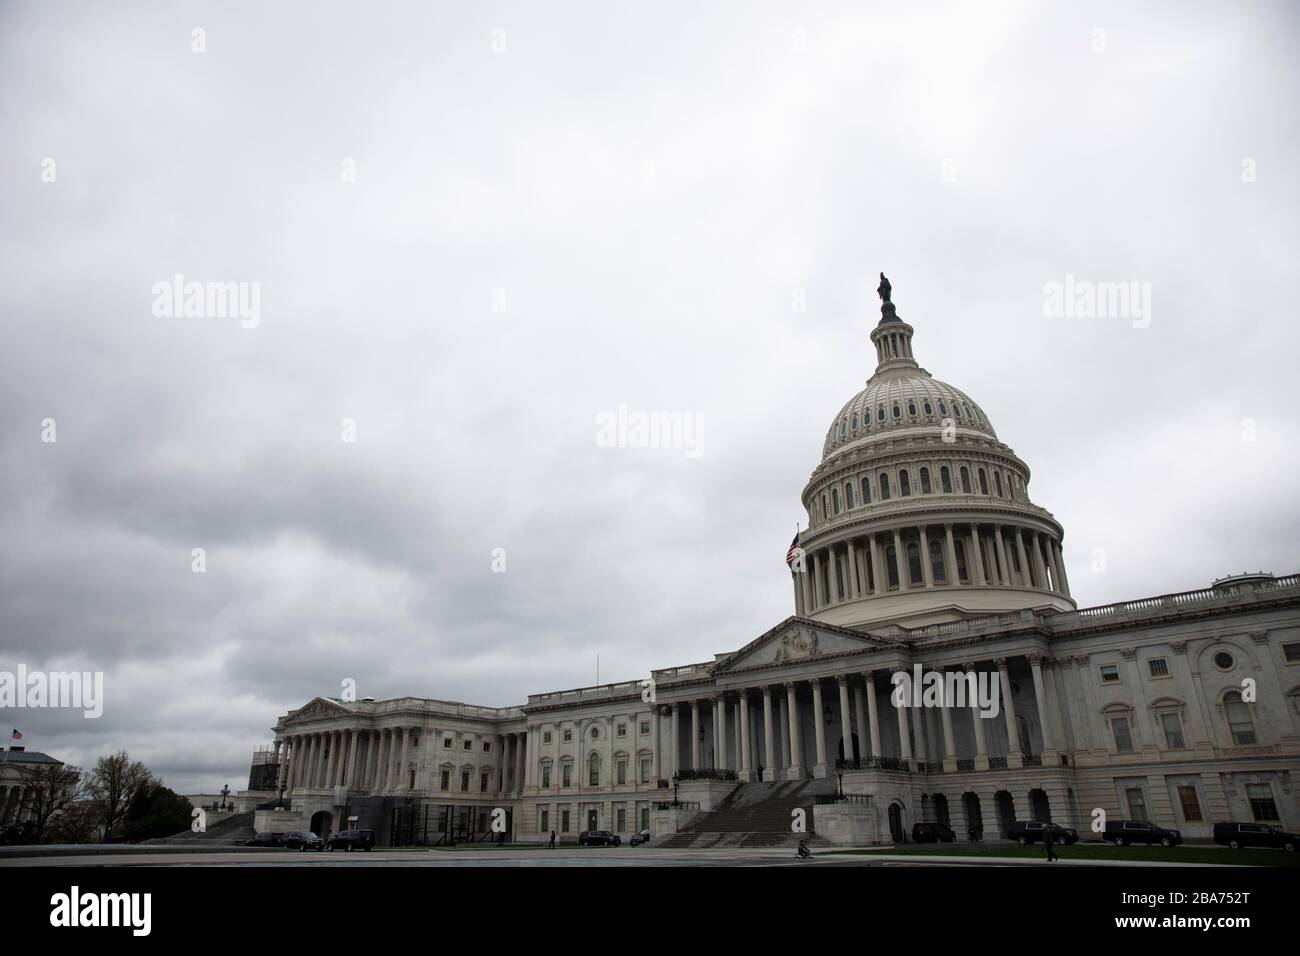 Washington, DC, USA. 25th Mar, 2020. Photo taken on March 25, 2020 shows the U.S. Capitol in Washington, DC, the United States. The U.S. Senate on Wednesday night passed a 2-trillion-dollar stimulus package to blunt the economic fallout of COVID-19, after rounds of negotiations between Democrats and Republicans. Credit: Ting Shen/Xinhua/Alamy Live News Stock Photo